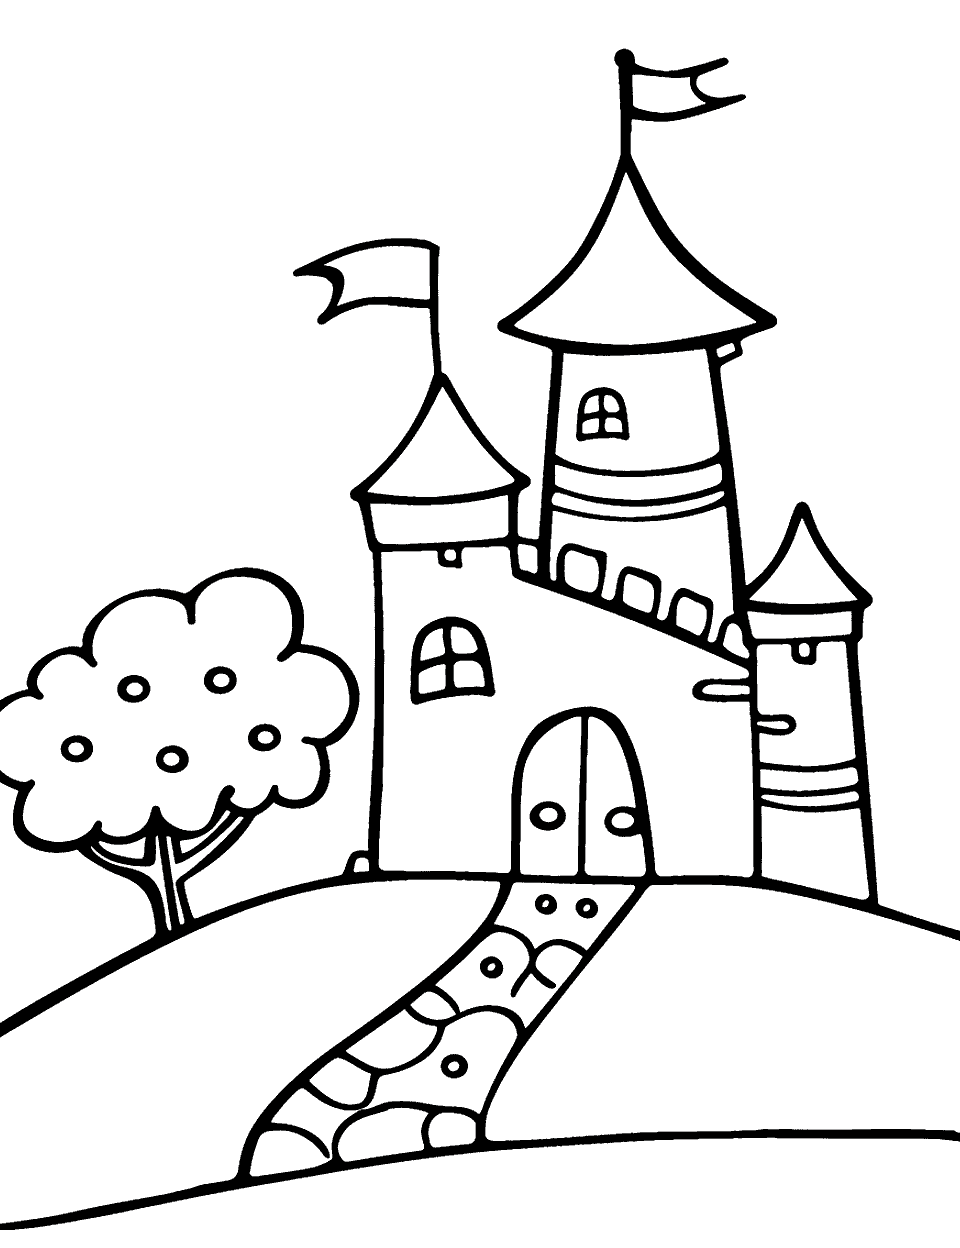 Fairy Tale Castle Coloring Page - A beautiful castle on a hill.